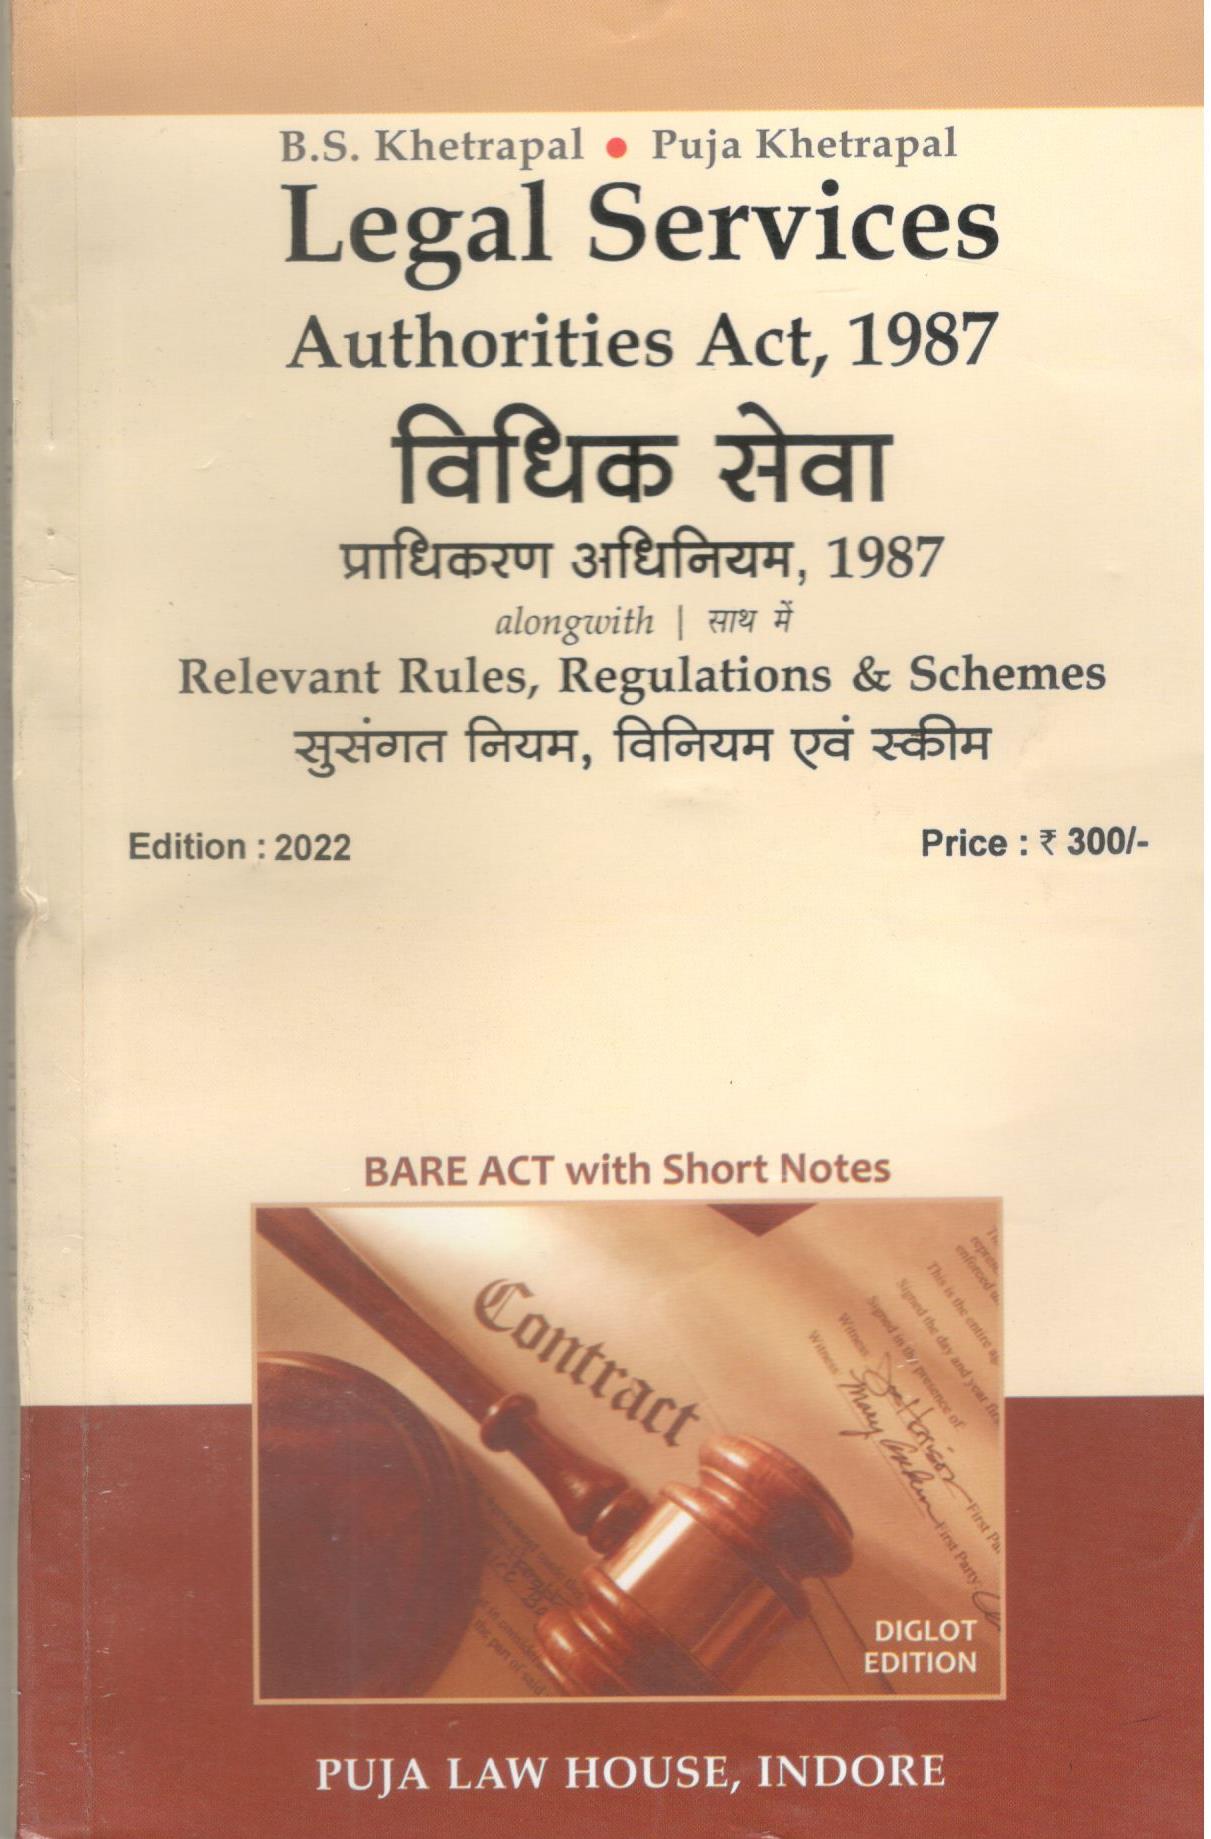 विधिक सेवा प्राधिकरण नियम, विनियम एवं स्कीम / Legal Services Authority Rules, Regulations and Schemes with Mediation and Conciliation Rules  